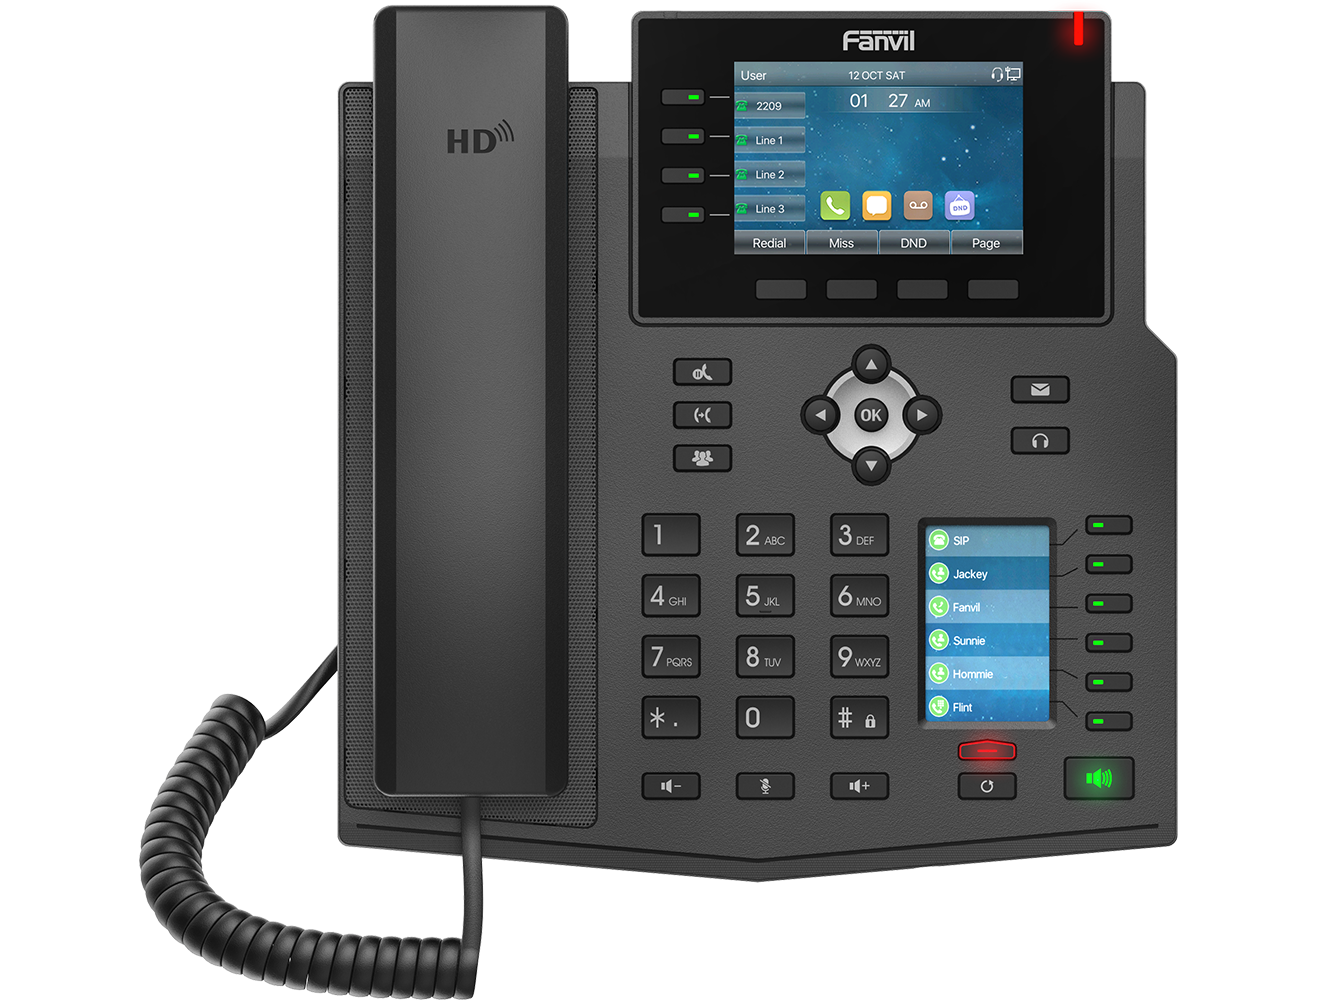 Is the Opus codec supported by the fanvil x5u, also known as Fanvil X5U-V2 16-Line Mid-level IP Phone?